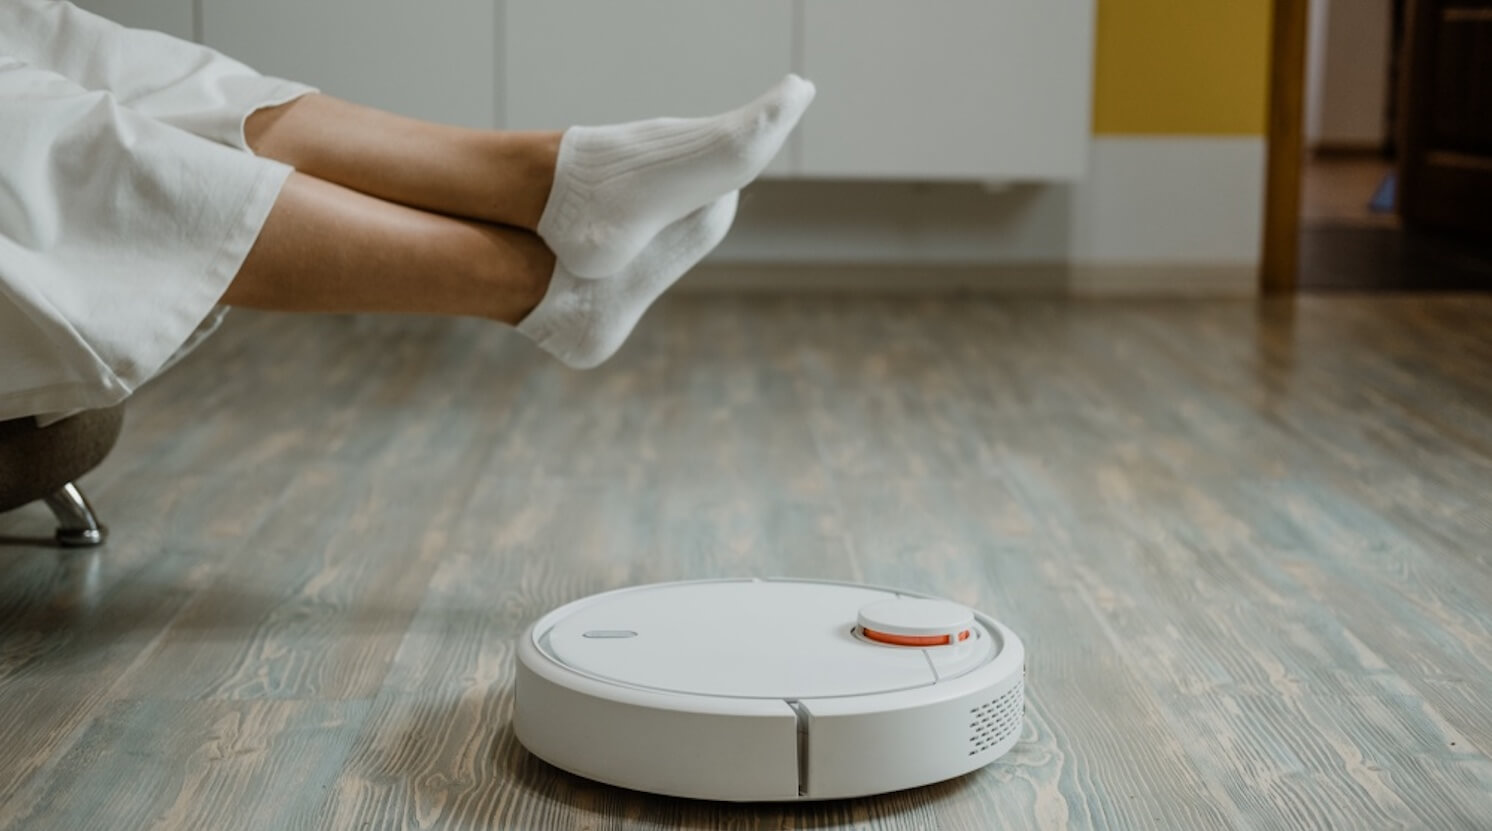 optimising-your-home-furniture-for-robot-vacuum-cleaners-1-1492x831